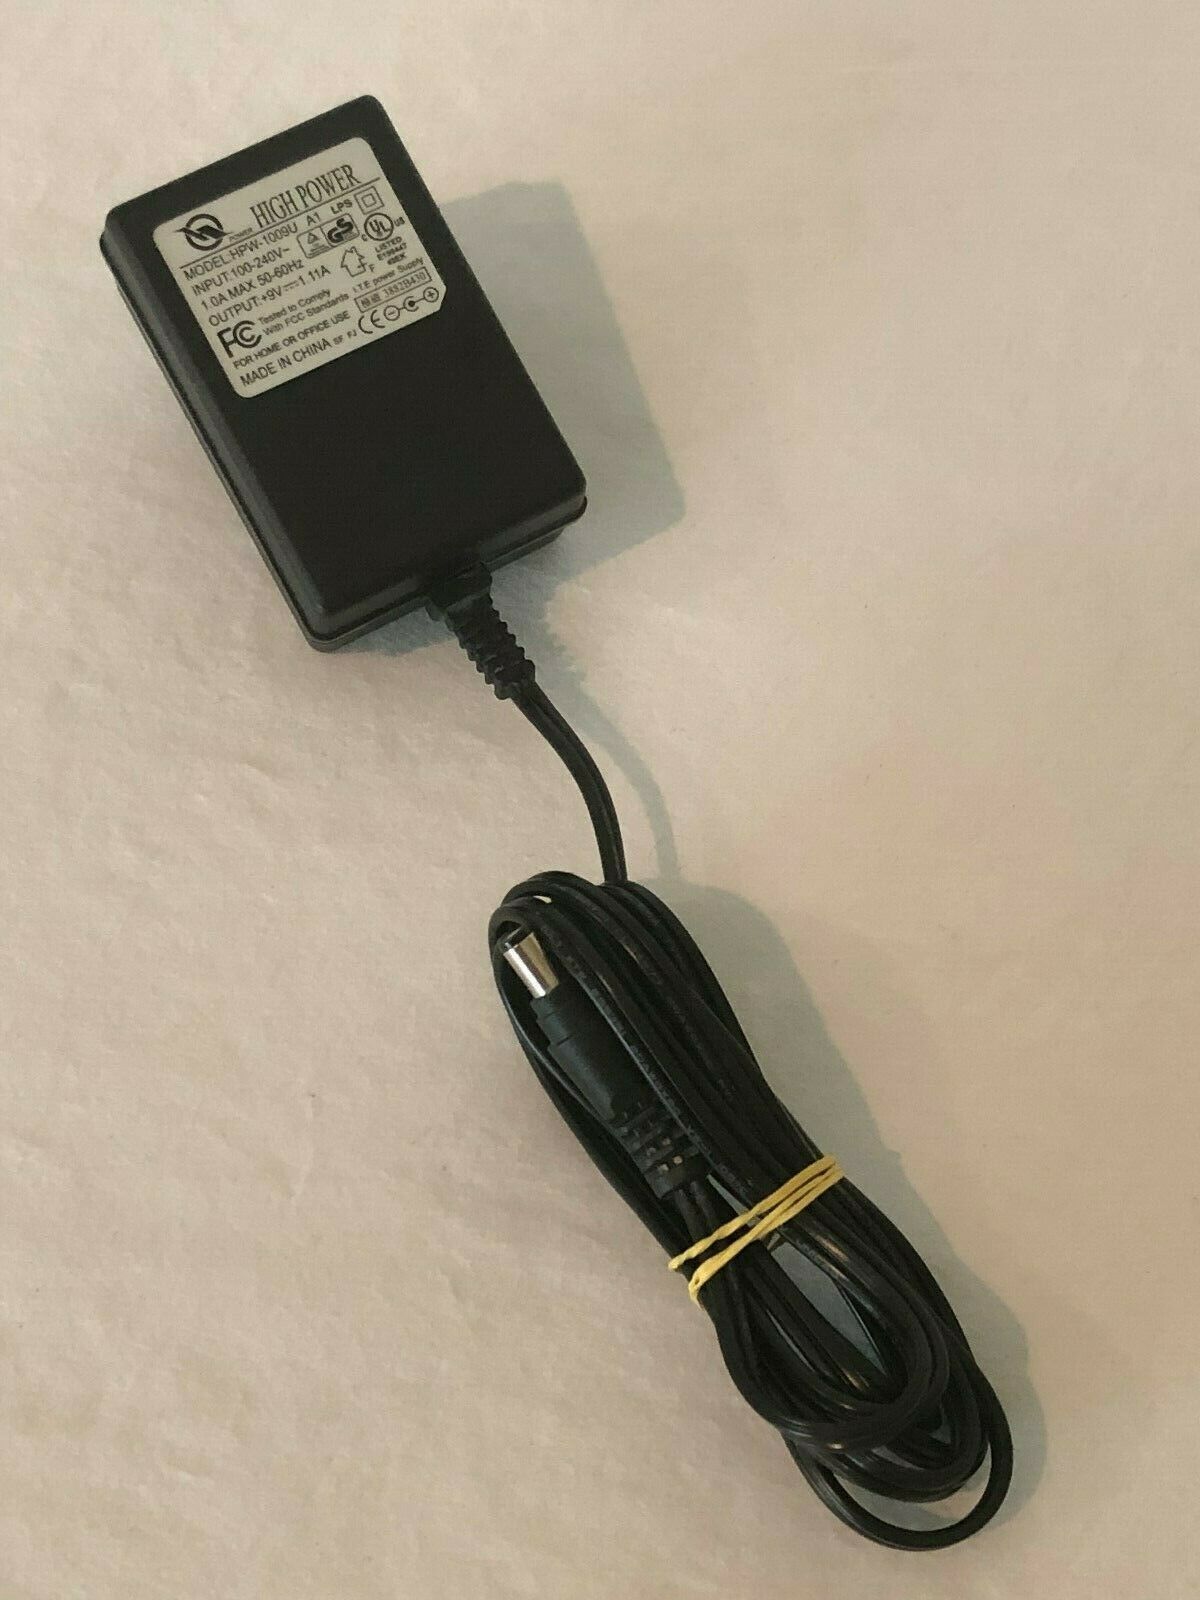 AC DC Power Supply Plug Charger Adapter High Power Model HPW-1009U 9V 1.11A Type: Charger Adapter Features: new Col